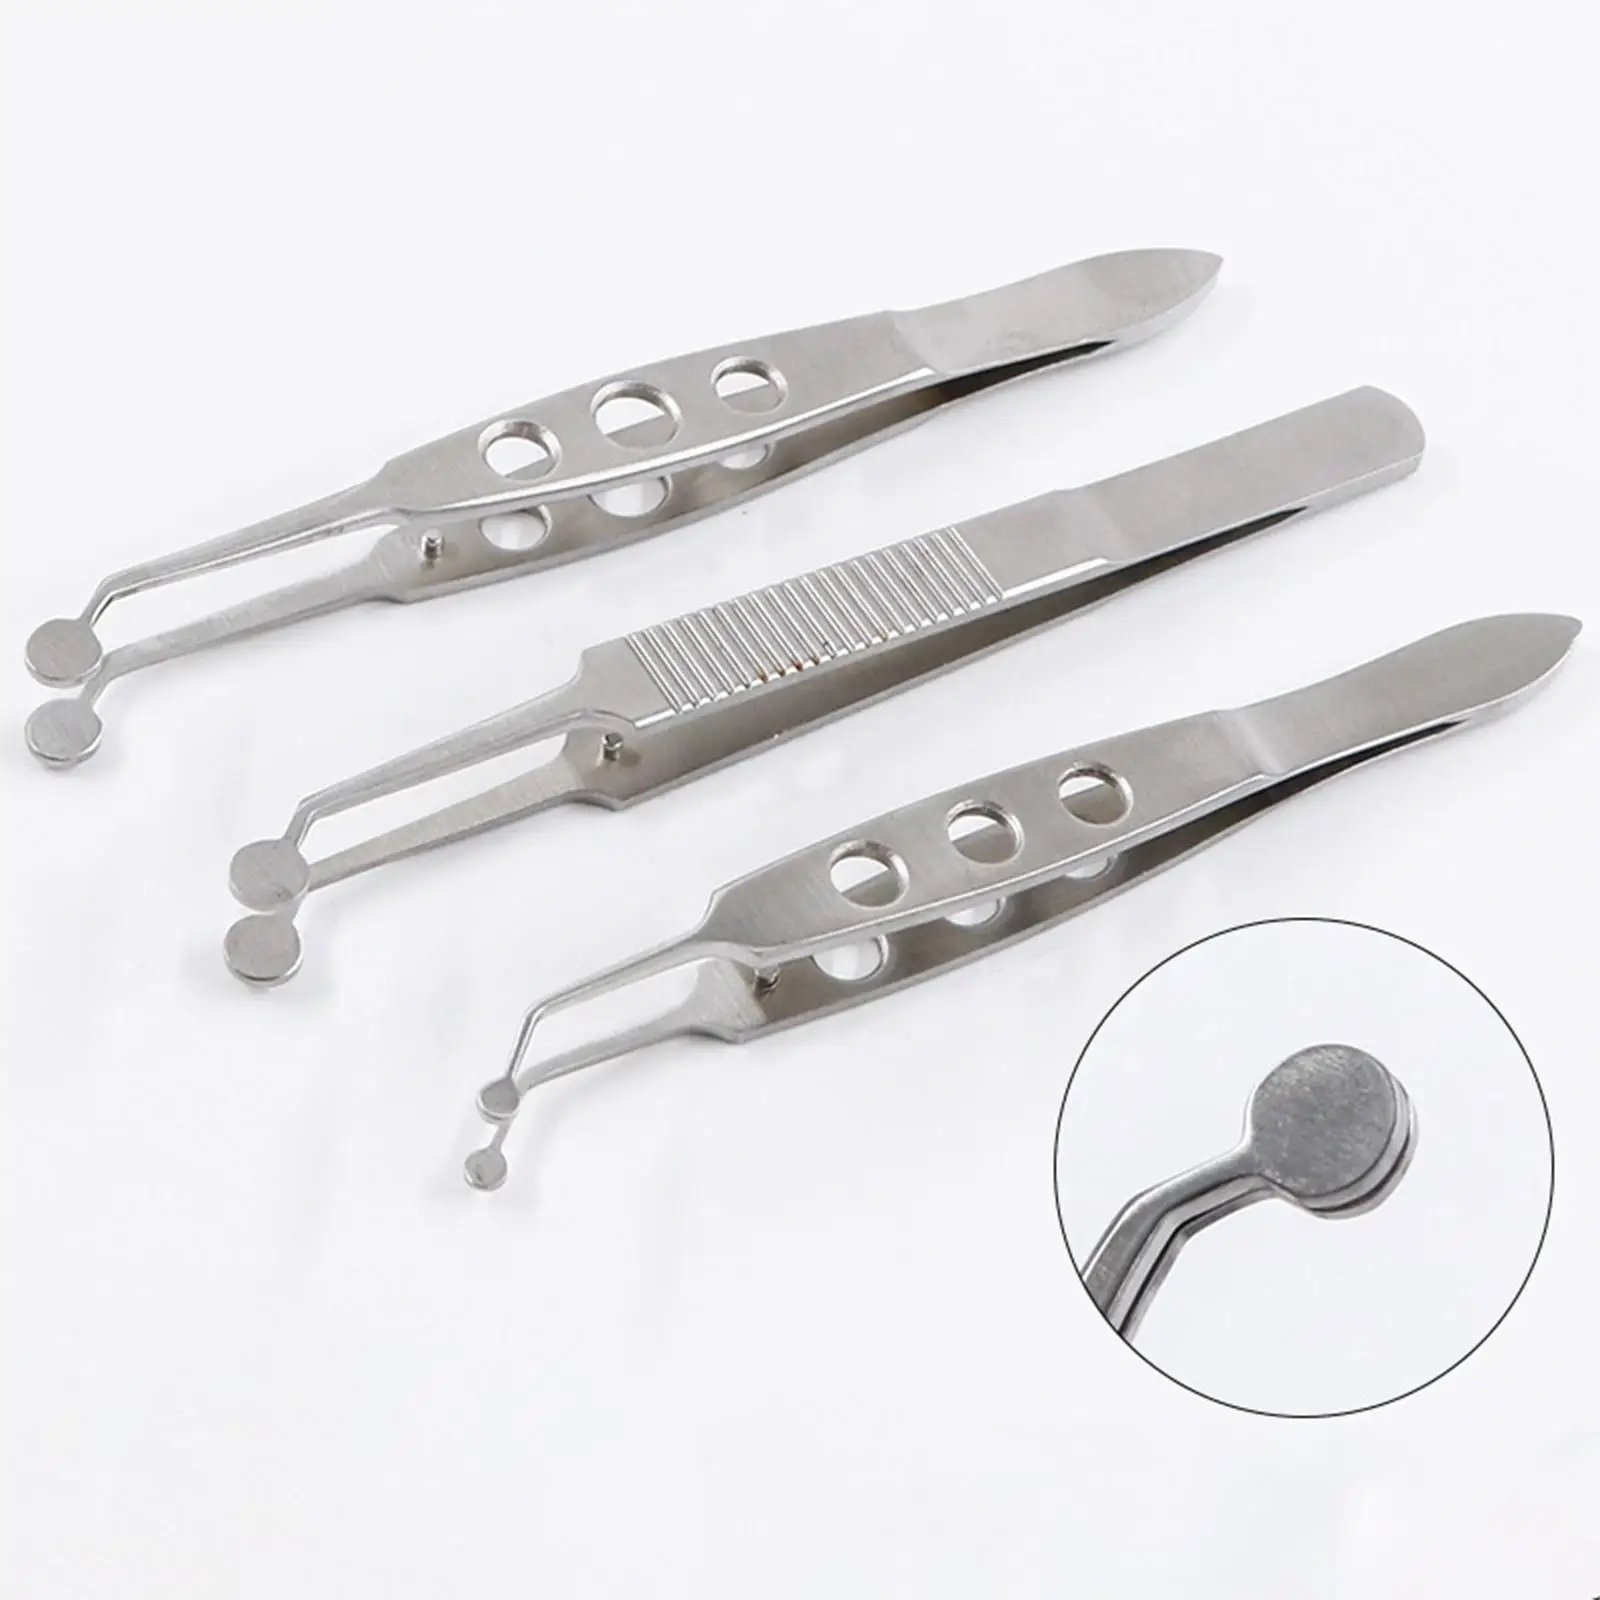 Meibomian Gland Forceps Ophthalmological Eye Tool High Precision Stainless Steel Tools Clip Clamp for Eyelid Meibomian Flap